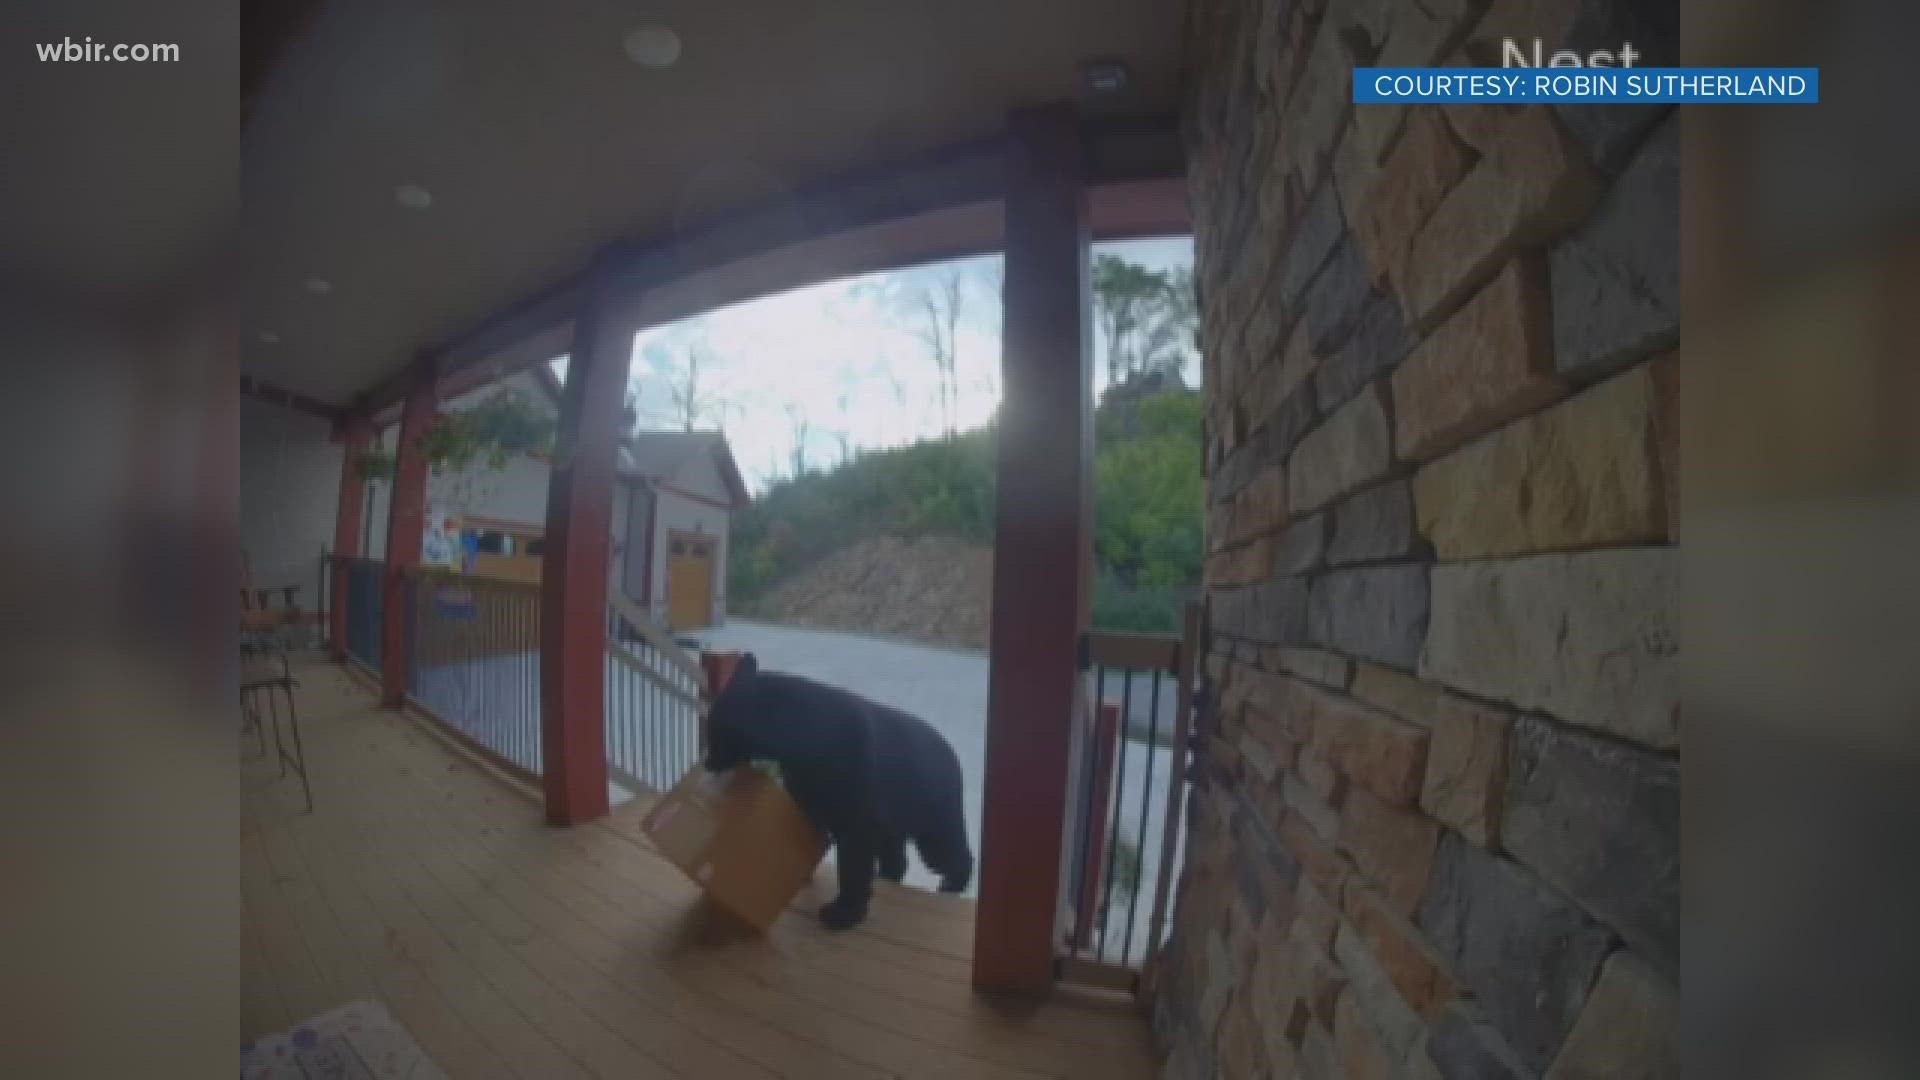 The bear took the more than 30-pound package right off her porch.